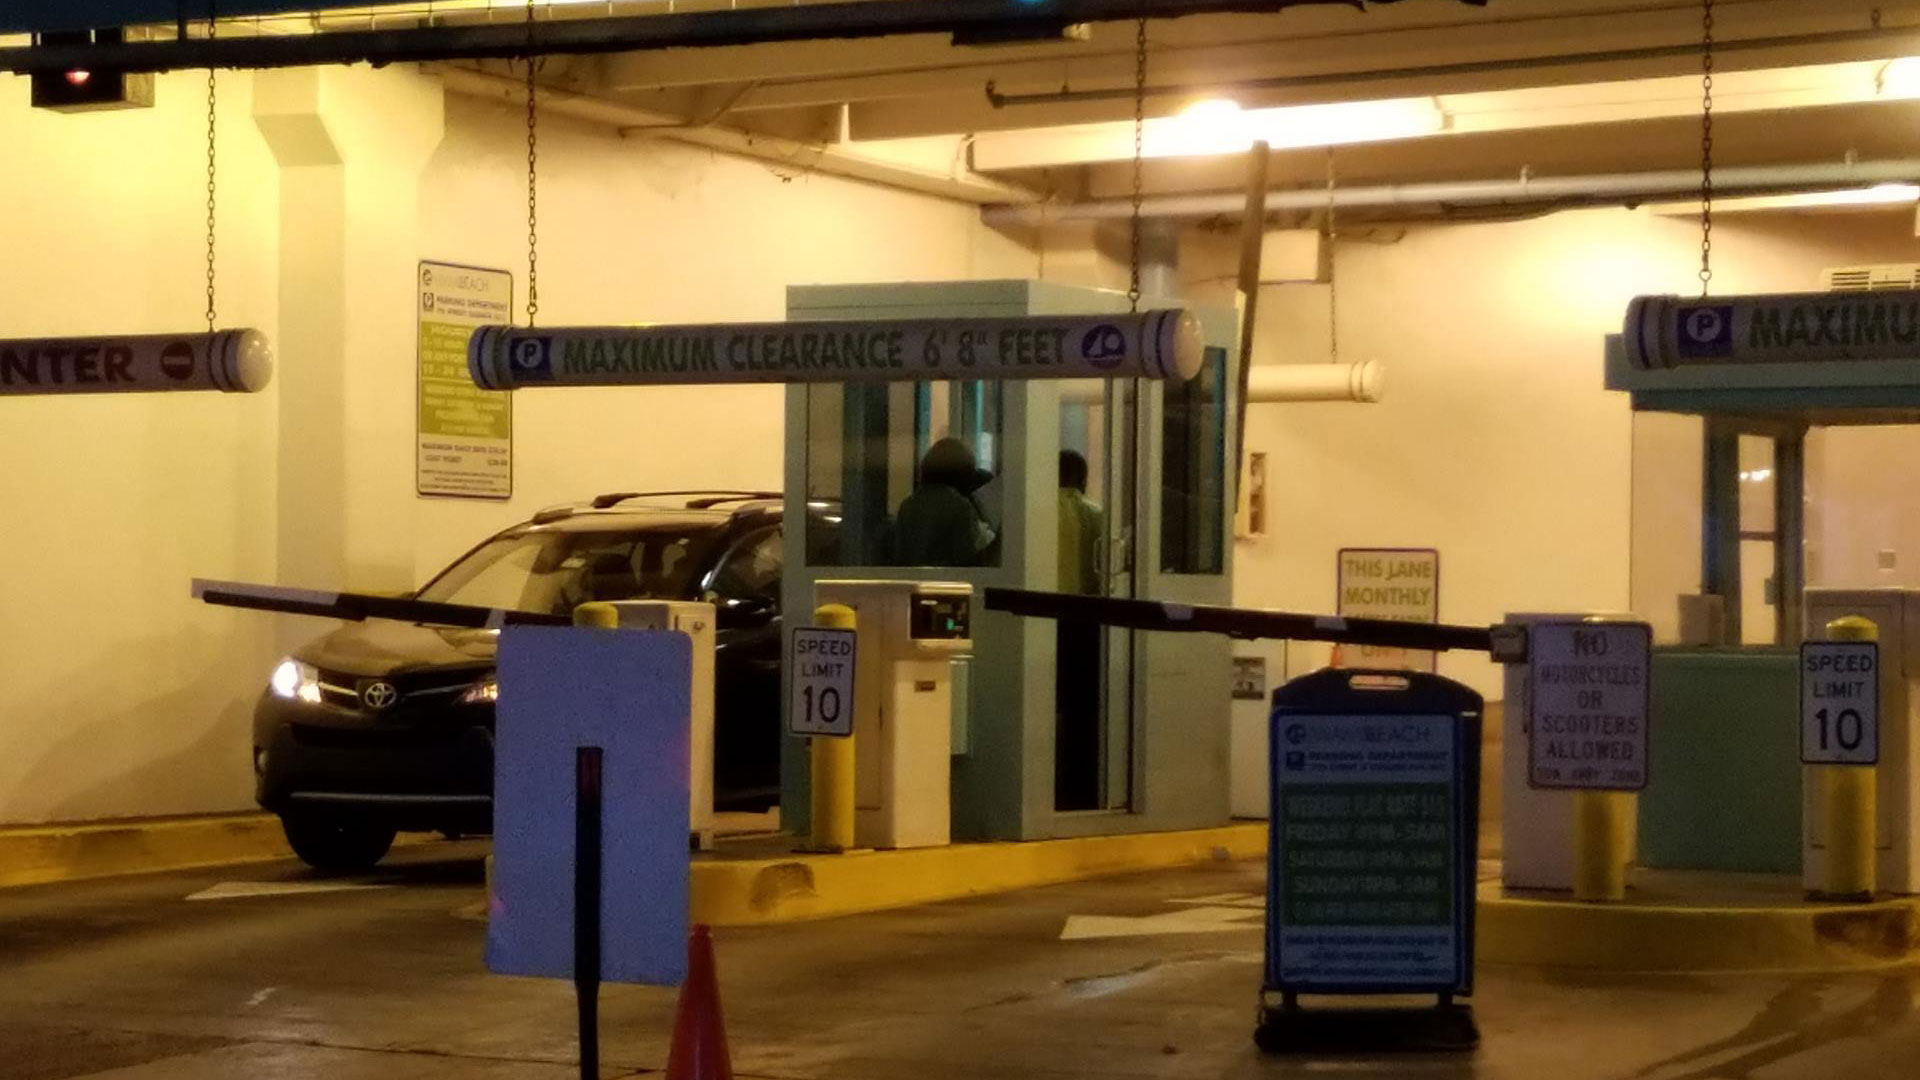 Parking Attendant Booth